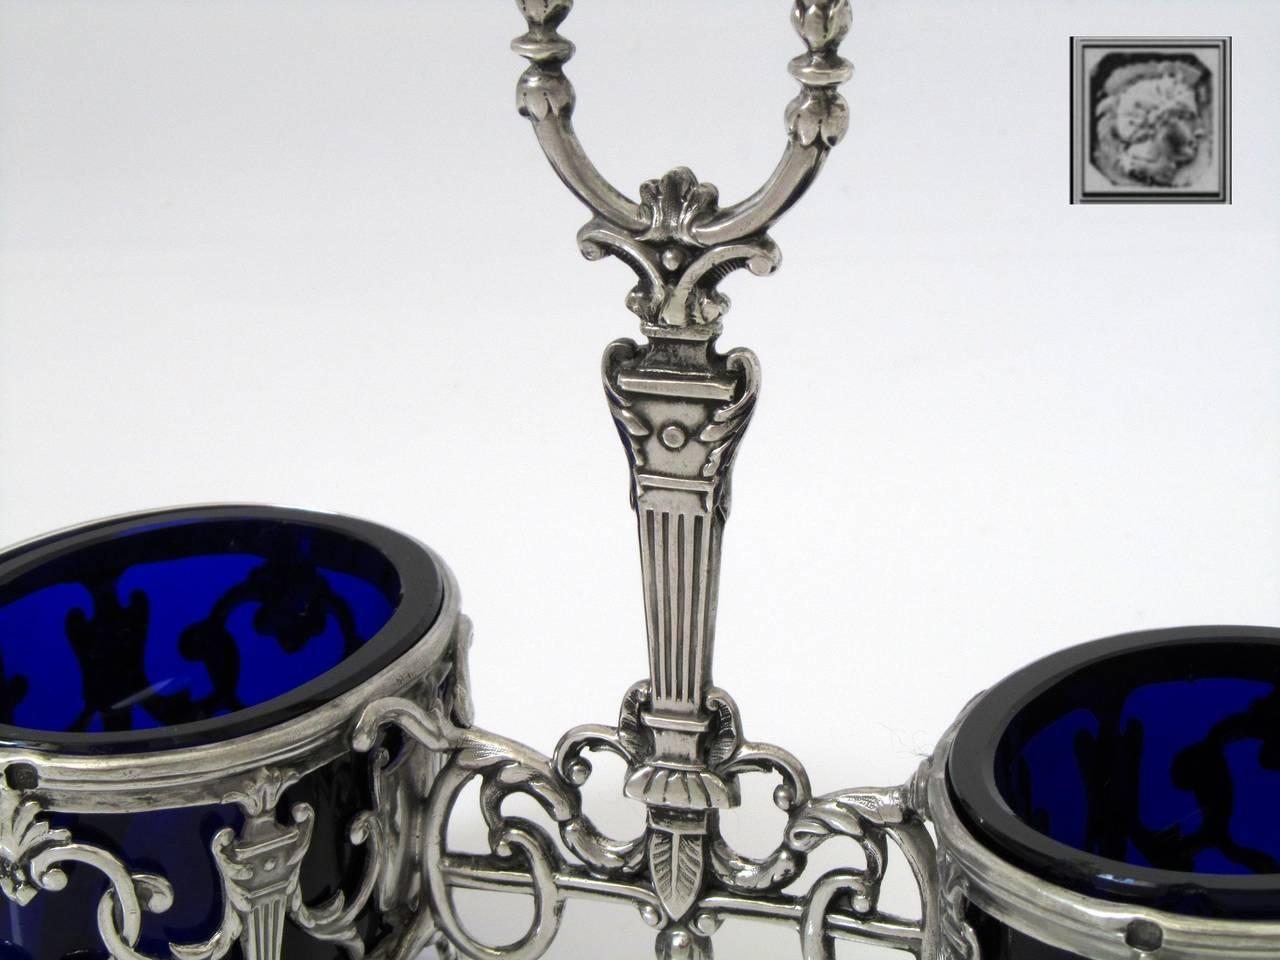 Head of Minerve 1st titre on the salt caddy for 950/1000 French sterling silver guarantees.

Exceptional antique French sterling silver open salt caddy with original cobalt glass. Napoleon III period. No monograms.

Measures:
7